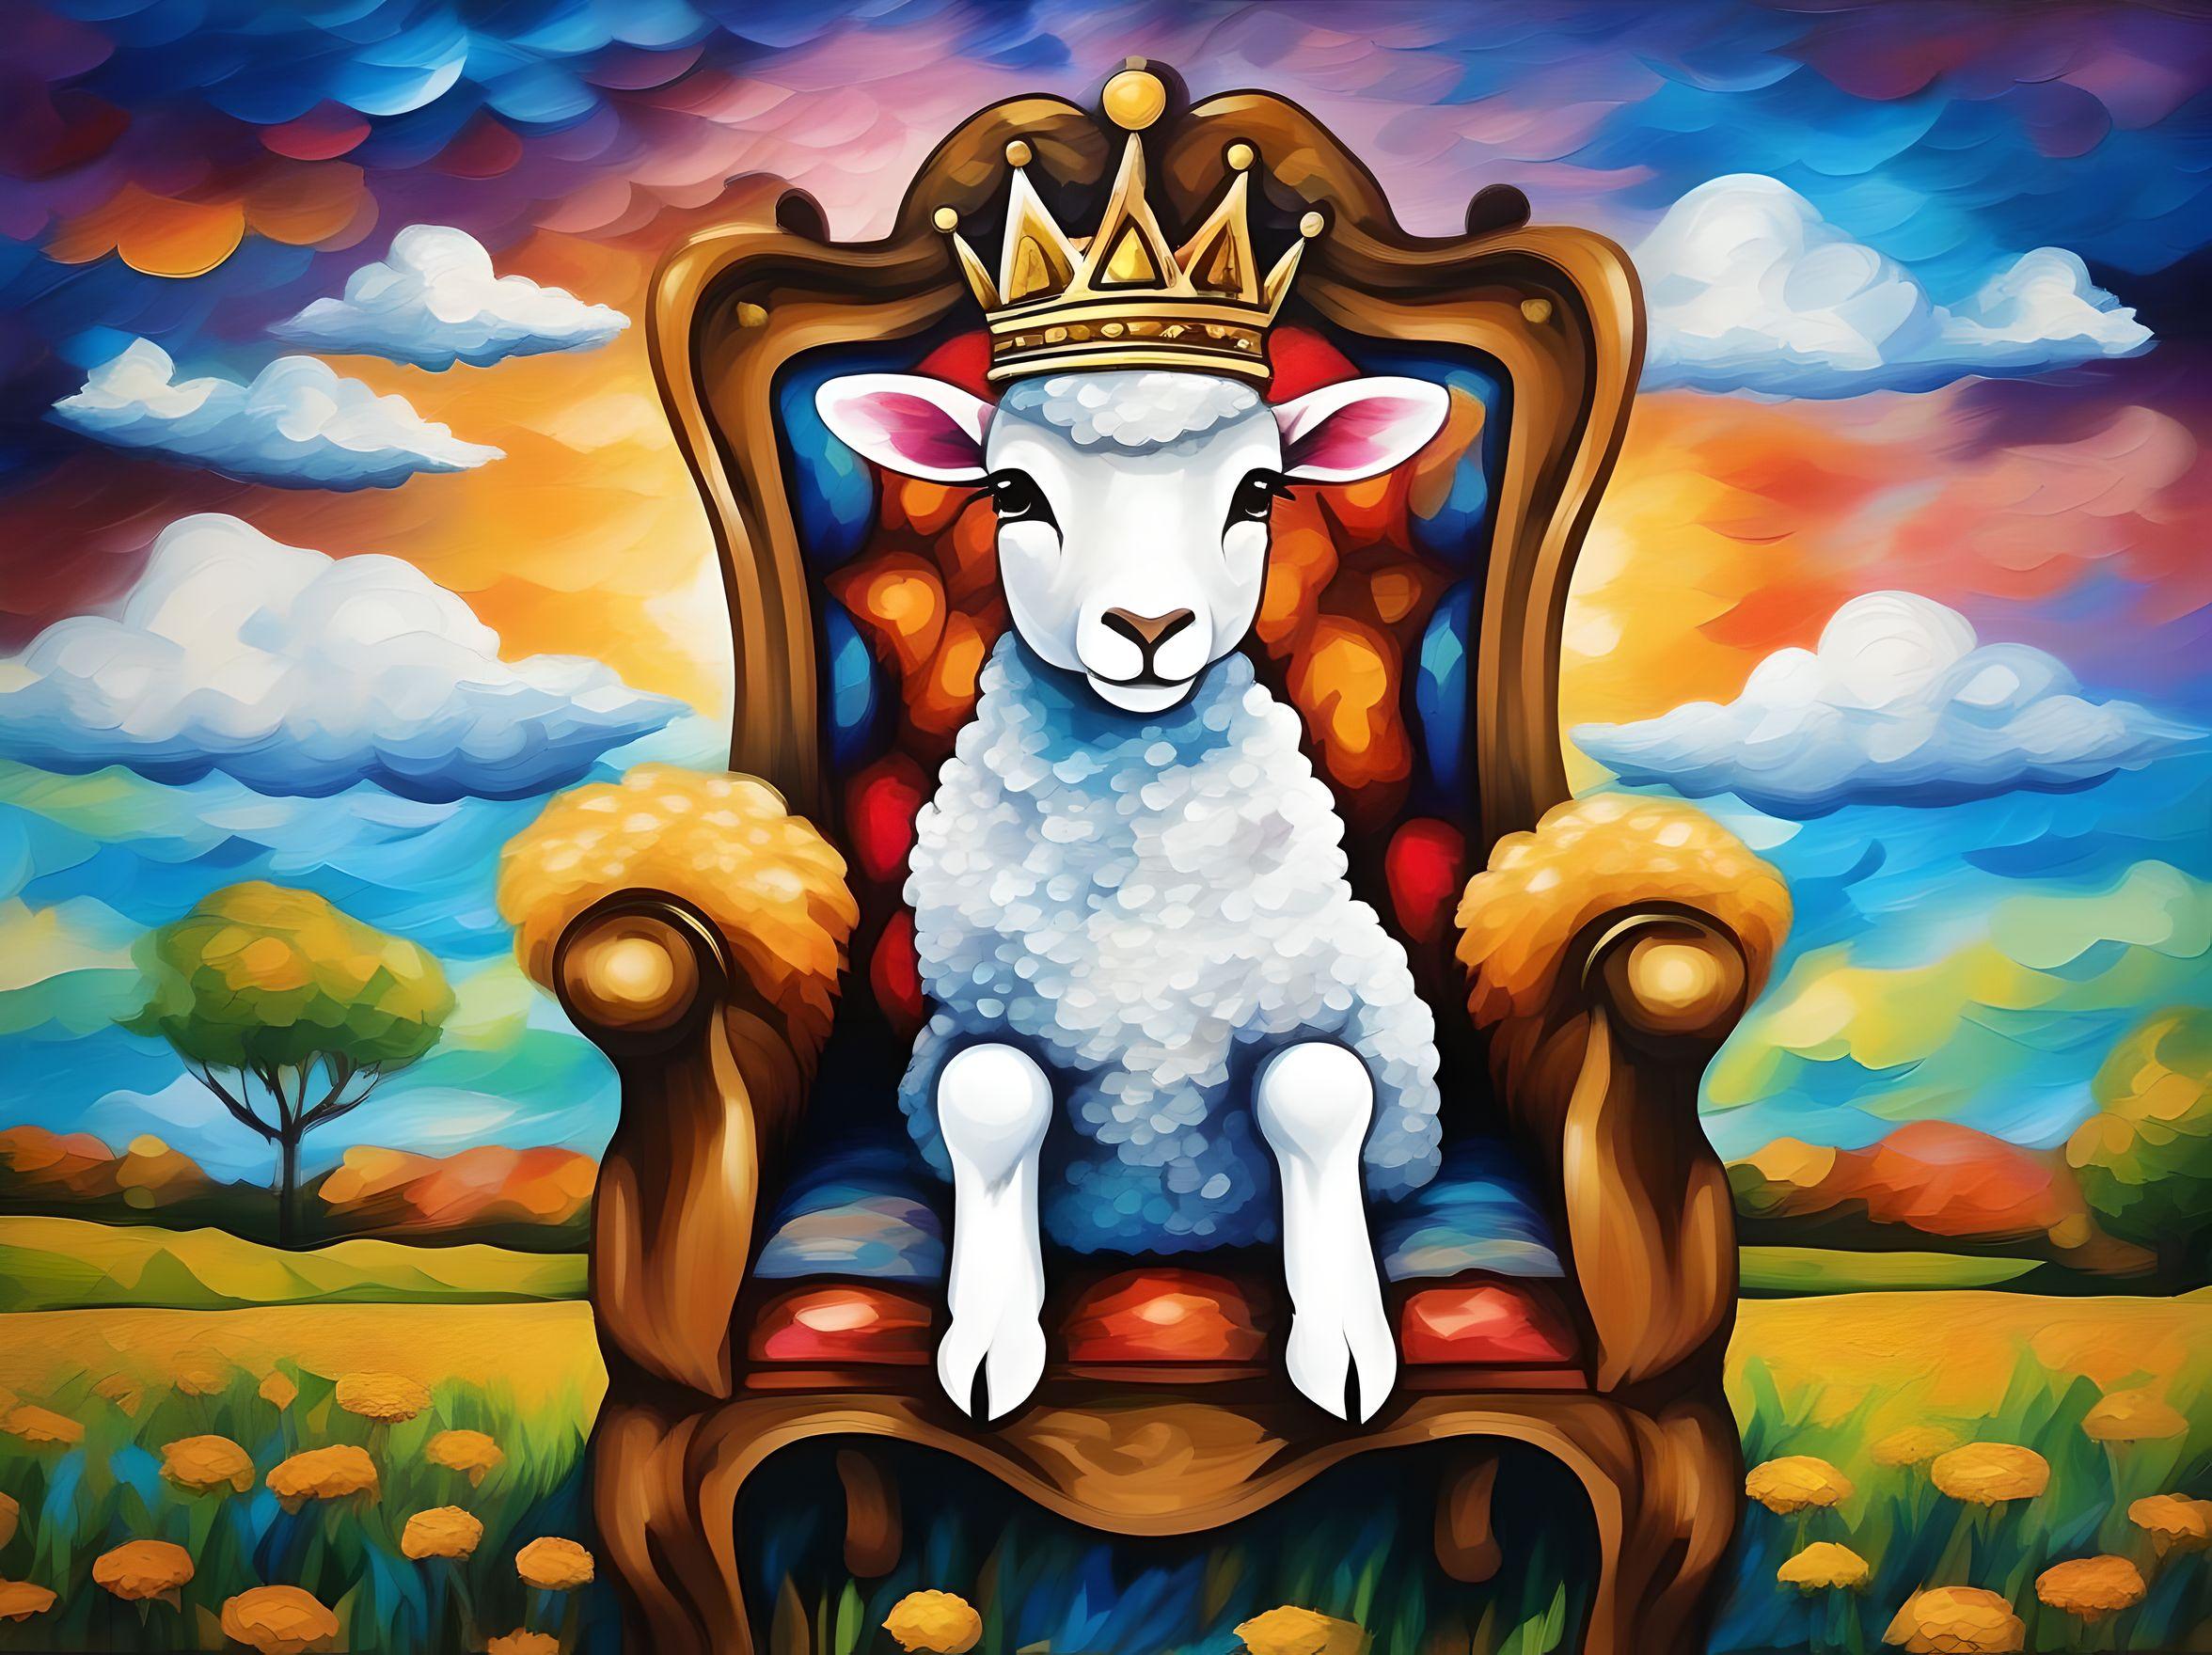 Lamb on a Throne Wearing a Crown